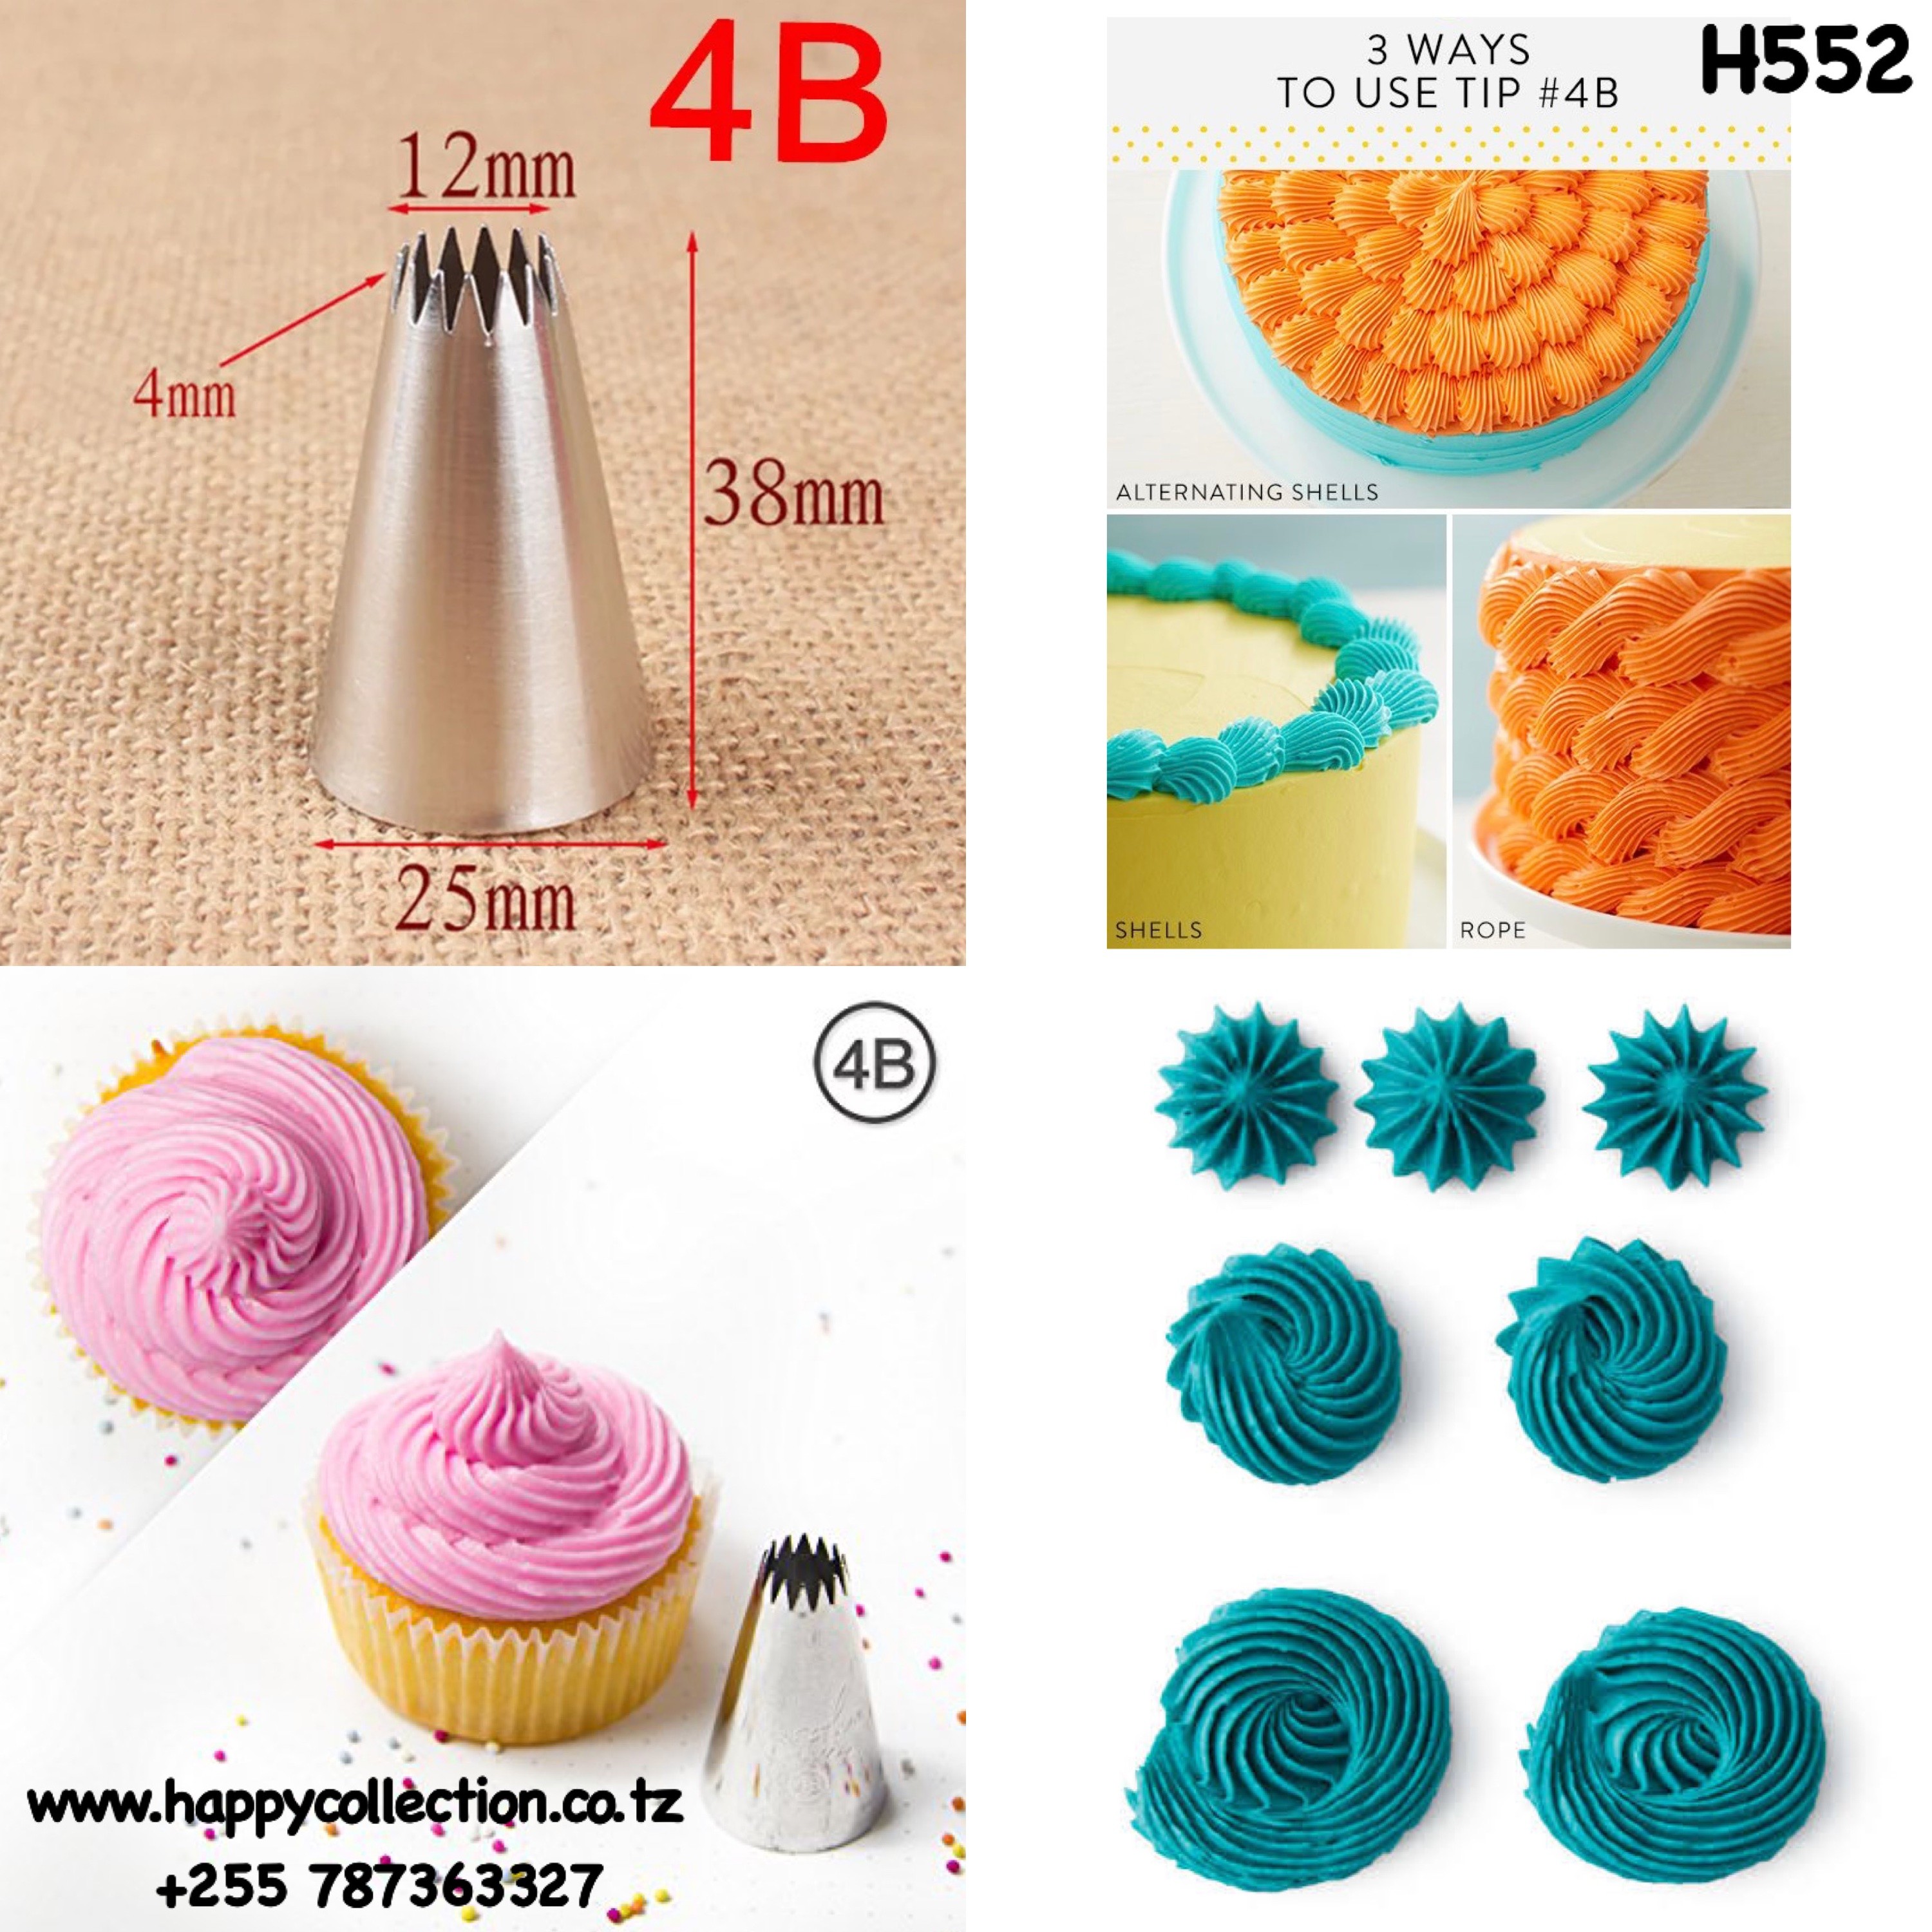 H552 4B ICING NOZZLE HAPPY COLLECTION